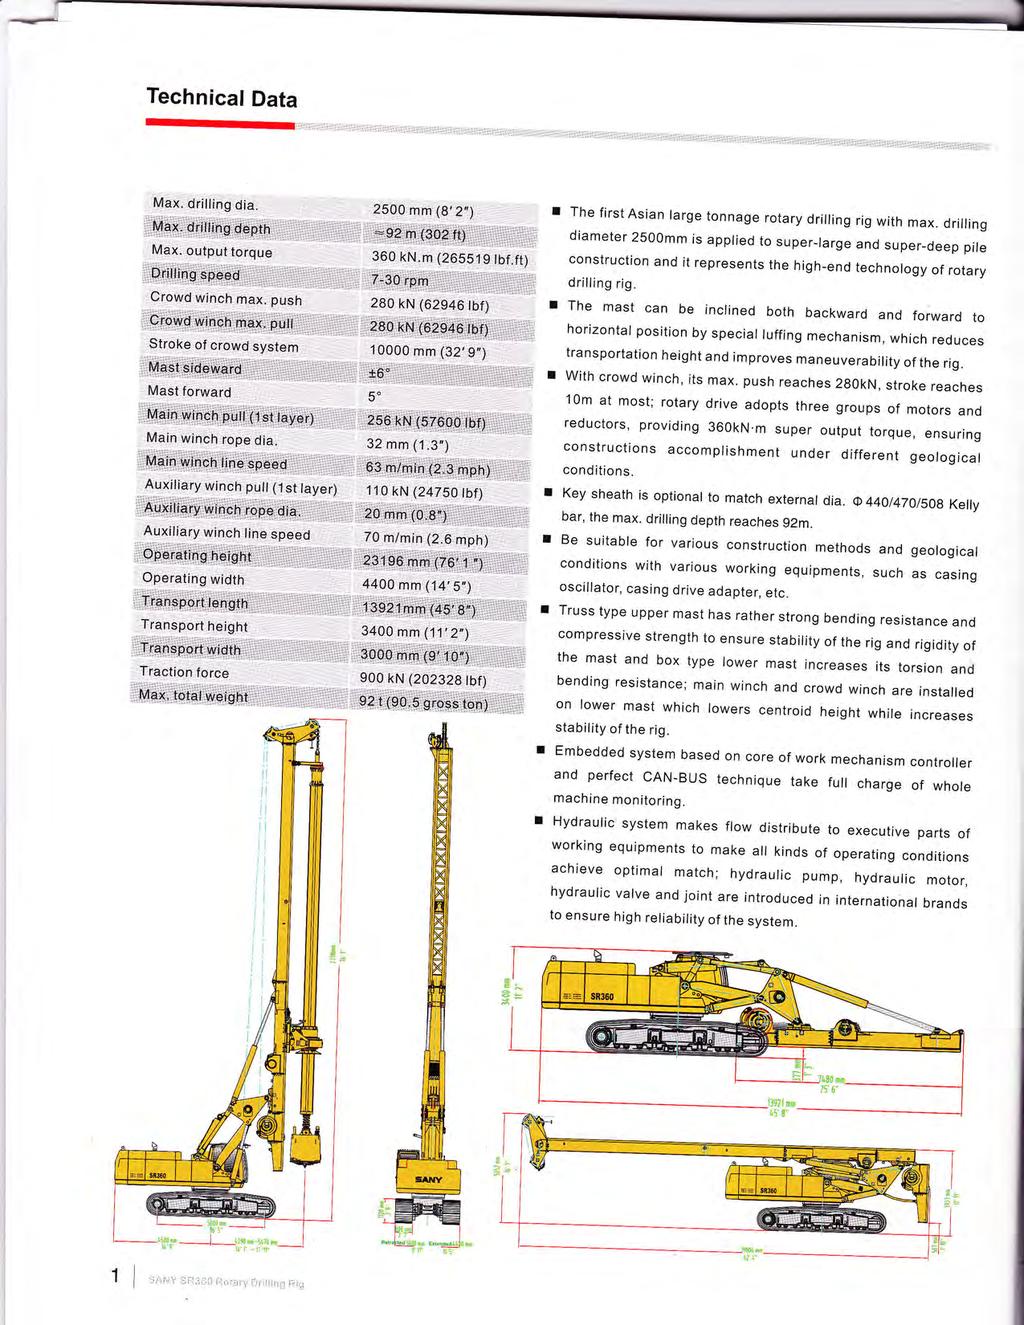 Technical Data r The first Asian large tonnage rotary drilling rig with max.